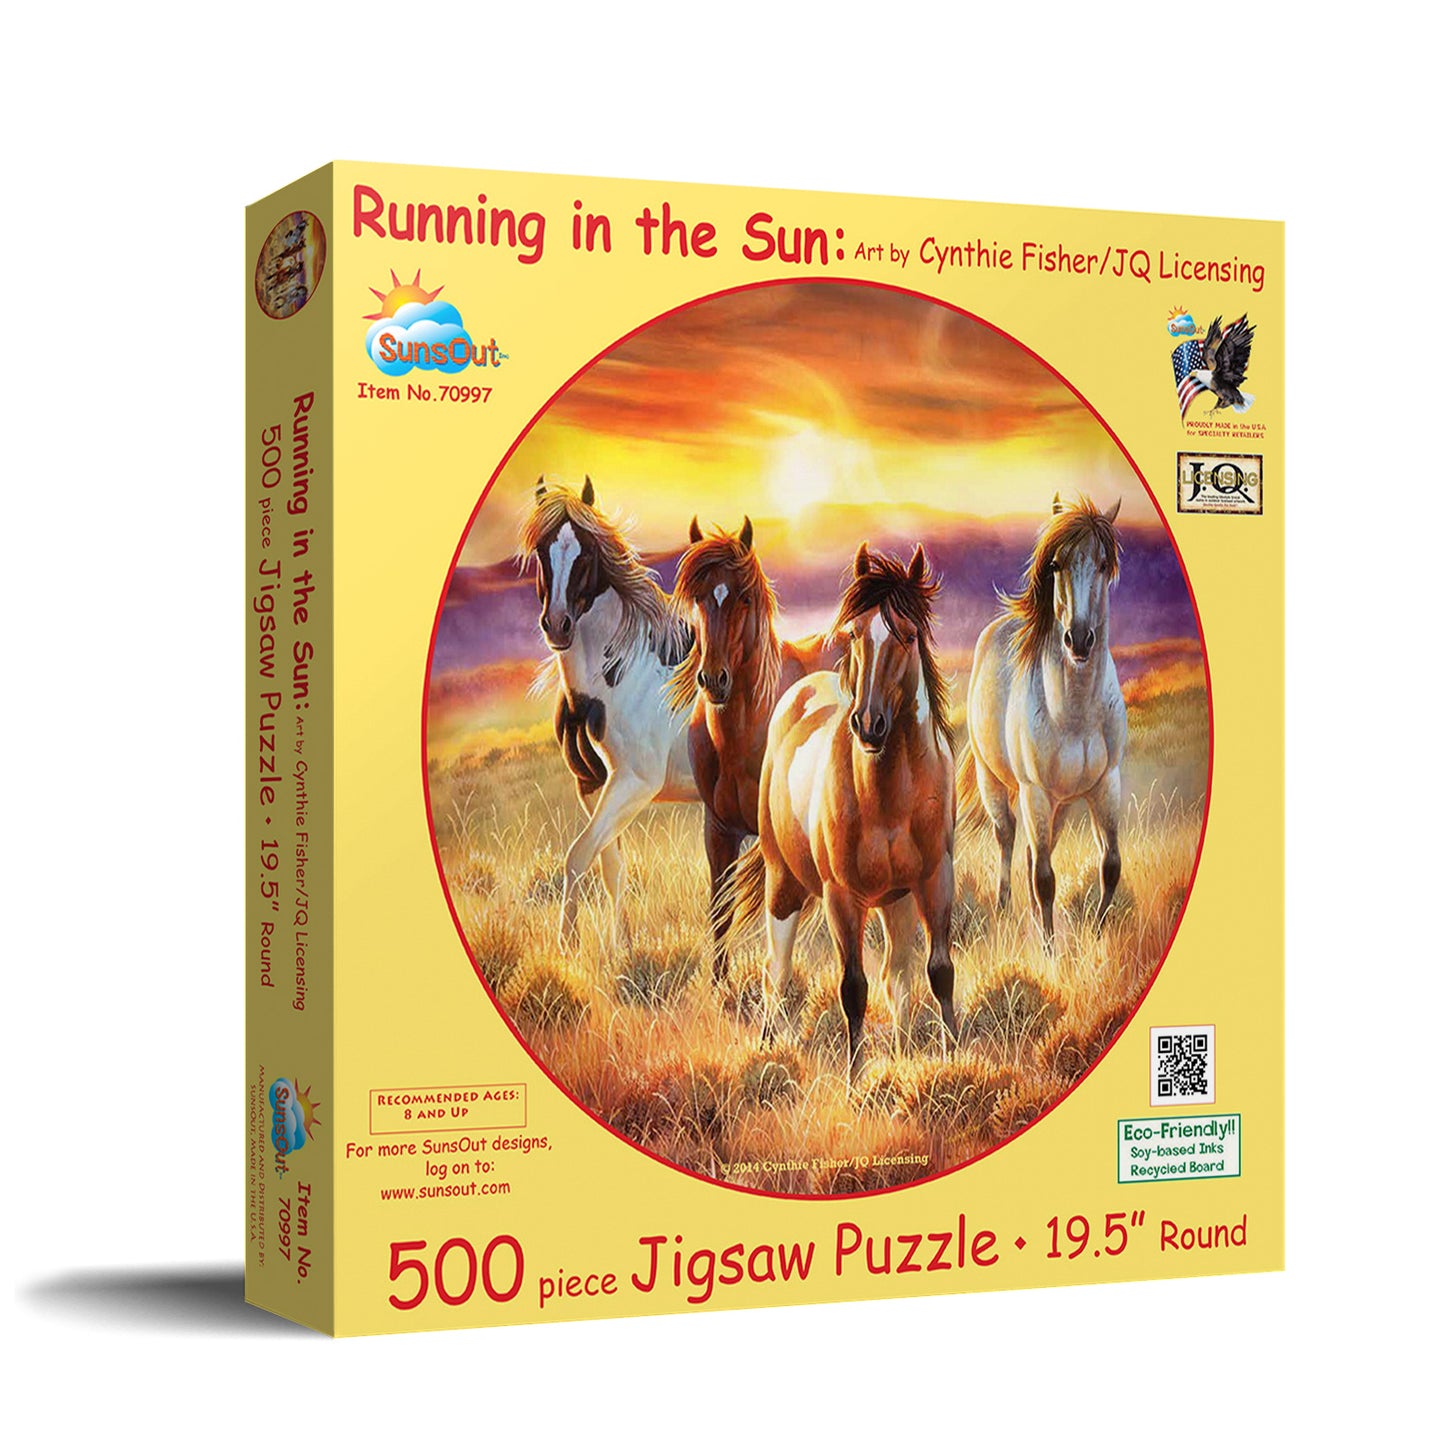 Running in the sun - 500 Piece Jigsaw Puzzle